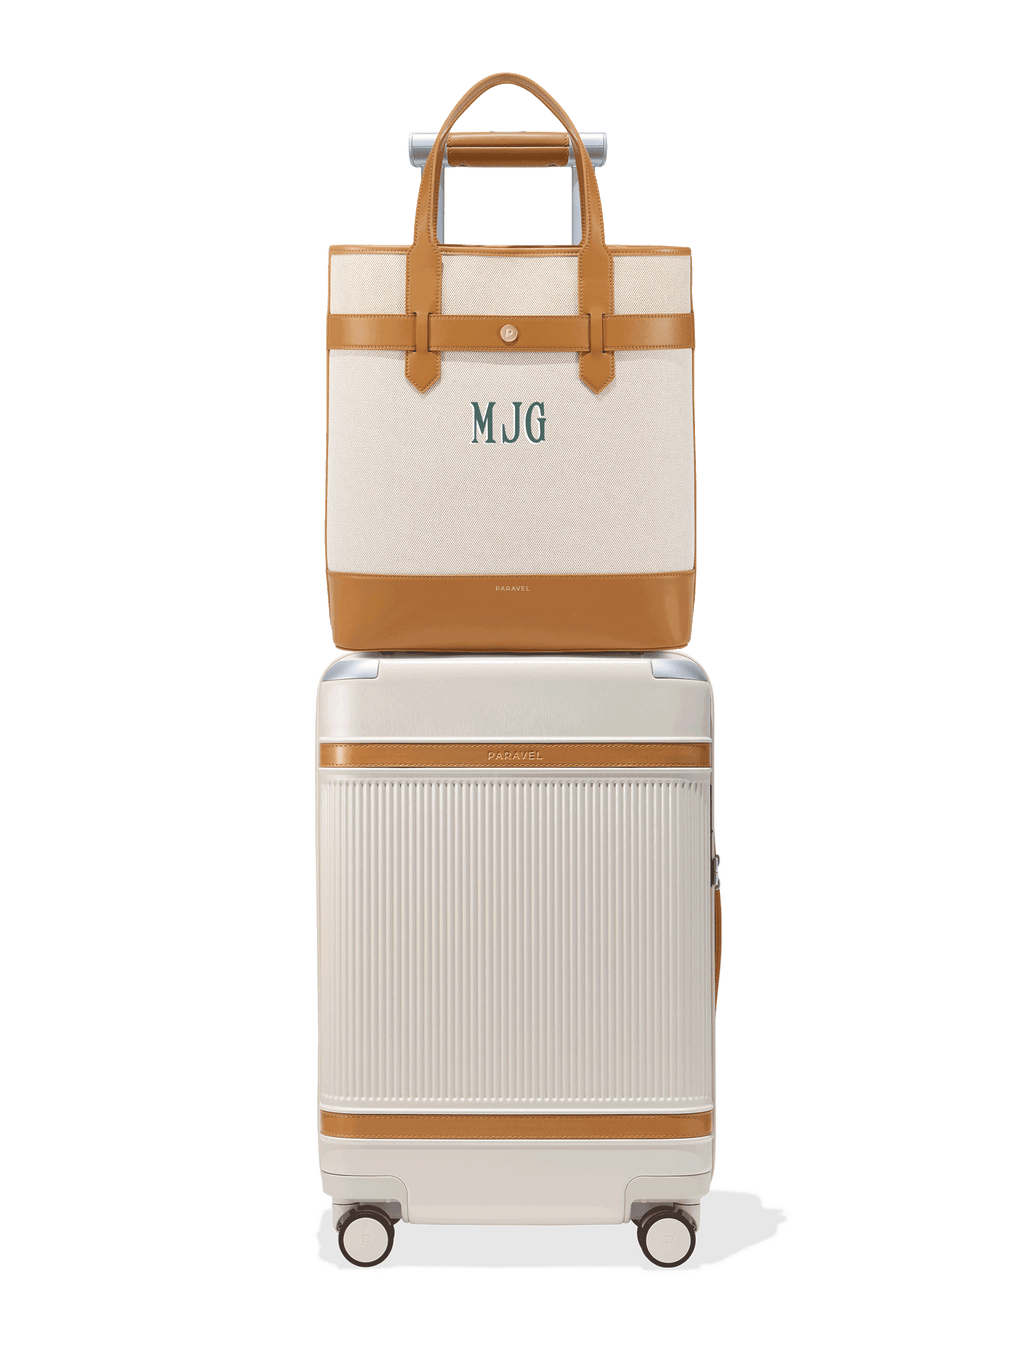 Large Capacity Tote Bag S706 (beige) : Clothing, Shoes & Jewelry 